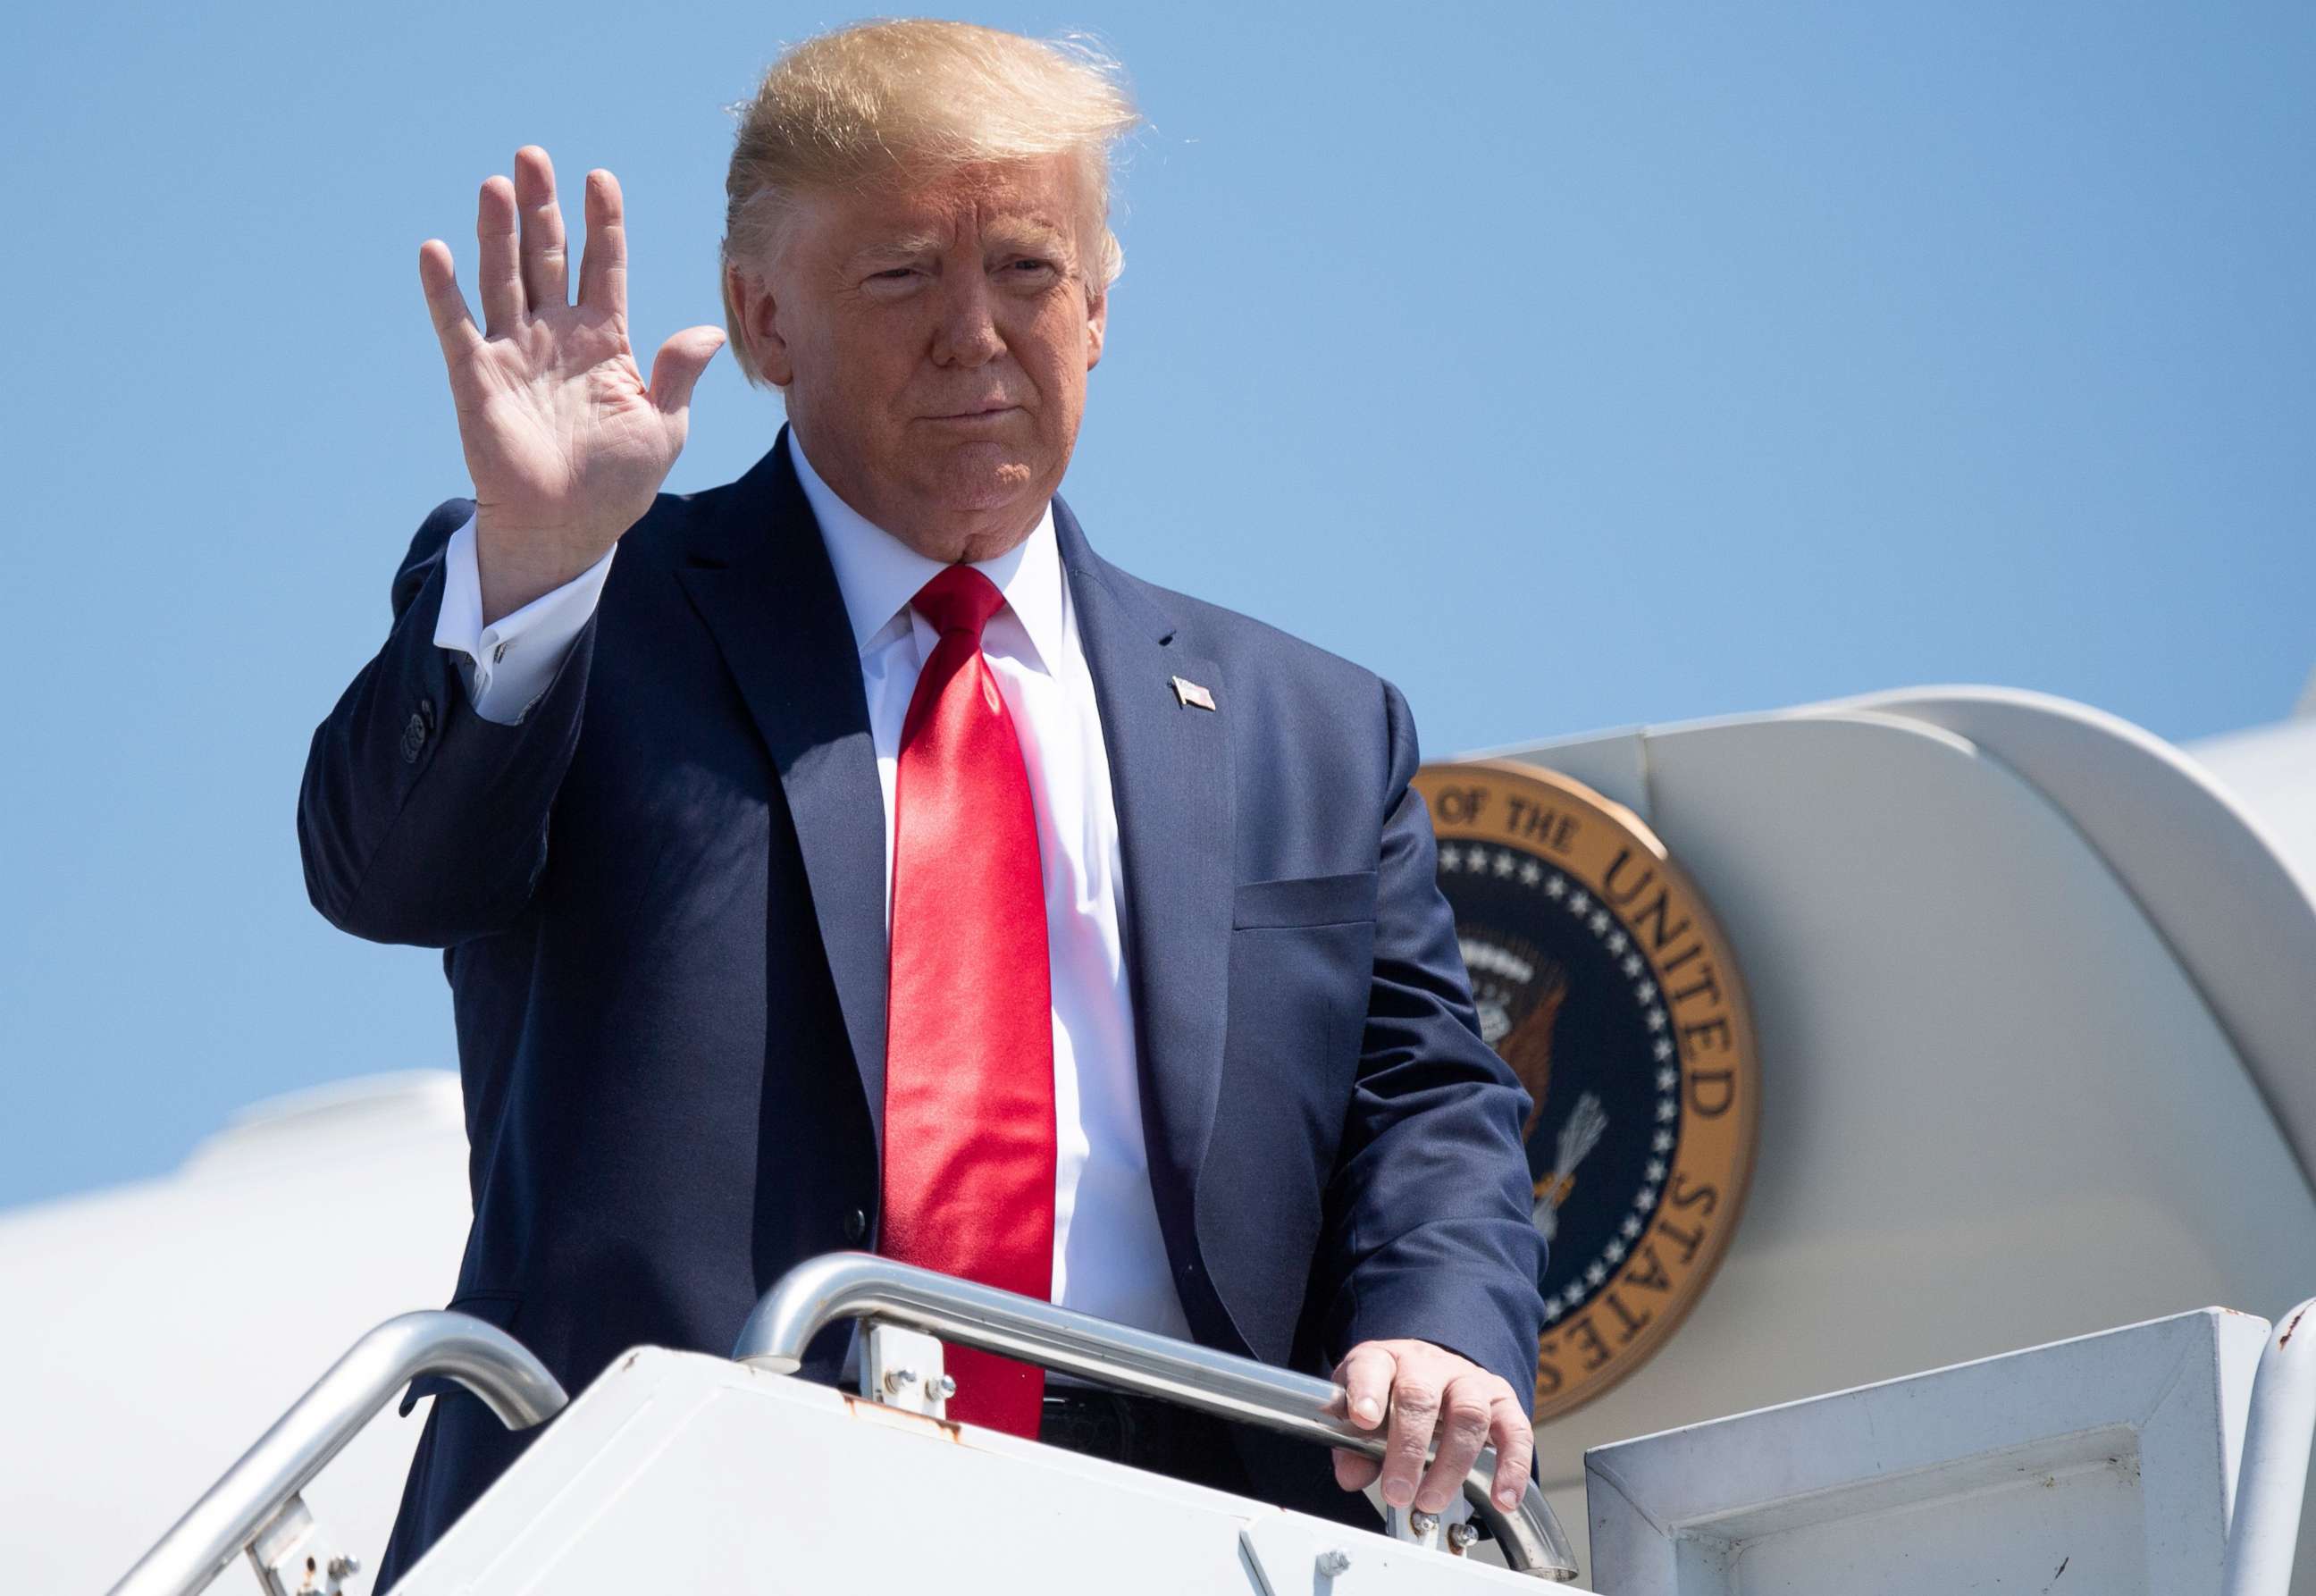 PHOTO: President Donald Trump disembarks from Air Force One upon arrival at Francis S. Gabreski Airport in Westhampton Beach, New York, Aug. 9, 2019, as he arrives for campaign fundraisers.